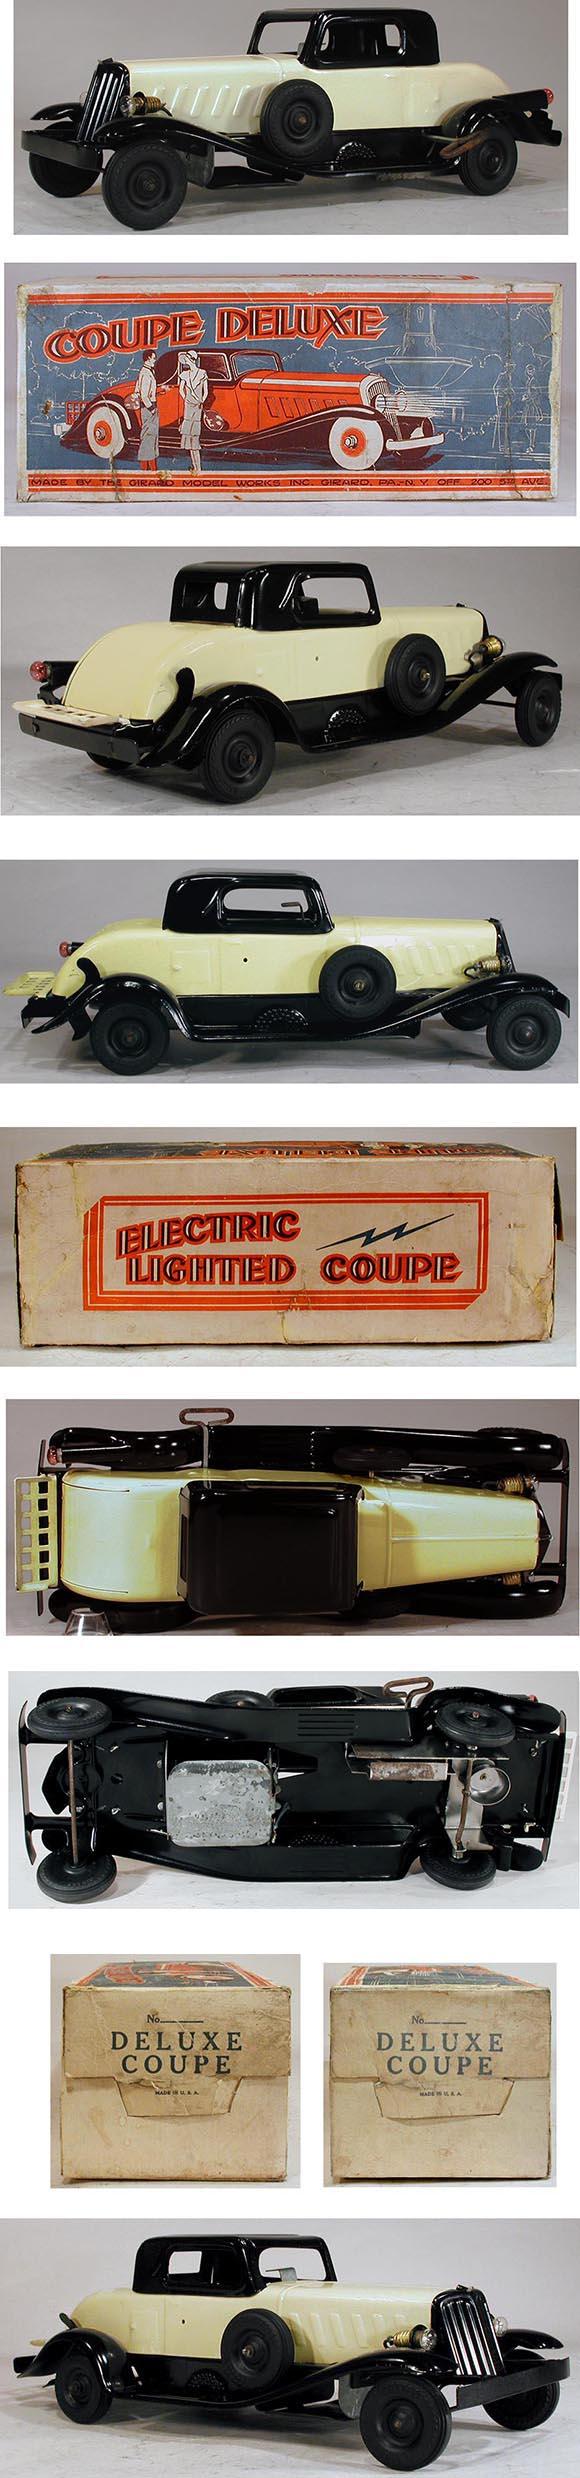 1933 Girard, Electric Lighted Coupe Deluxe in Original Box